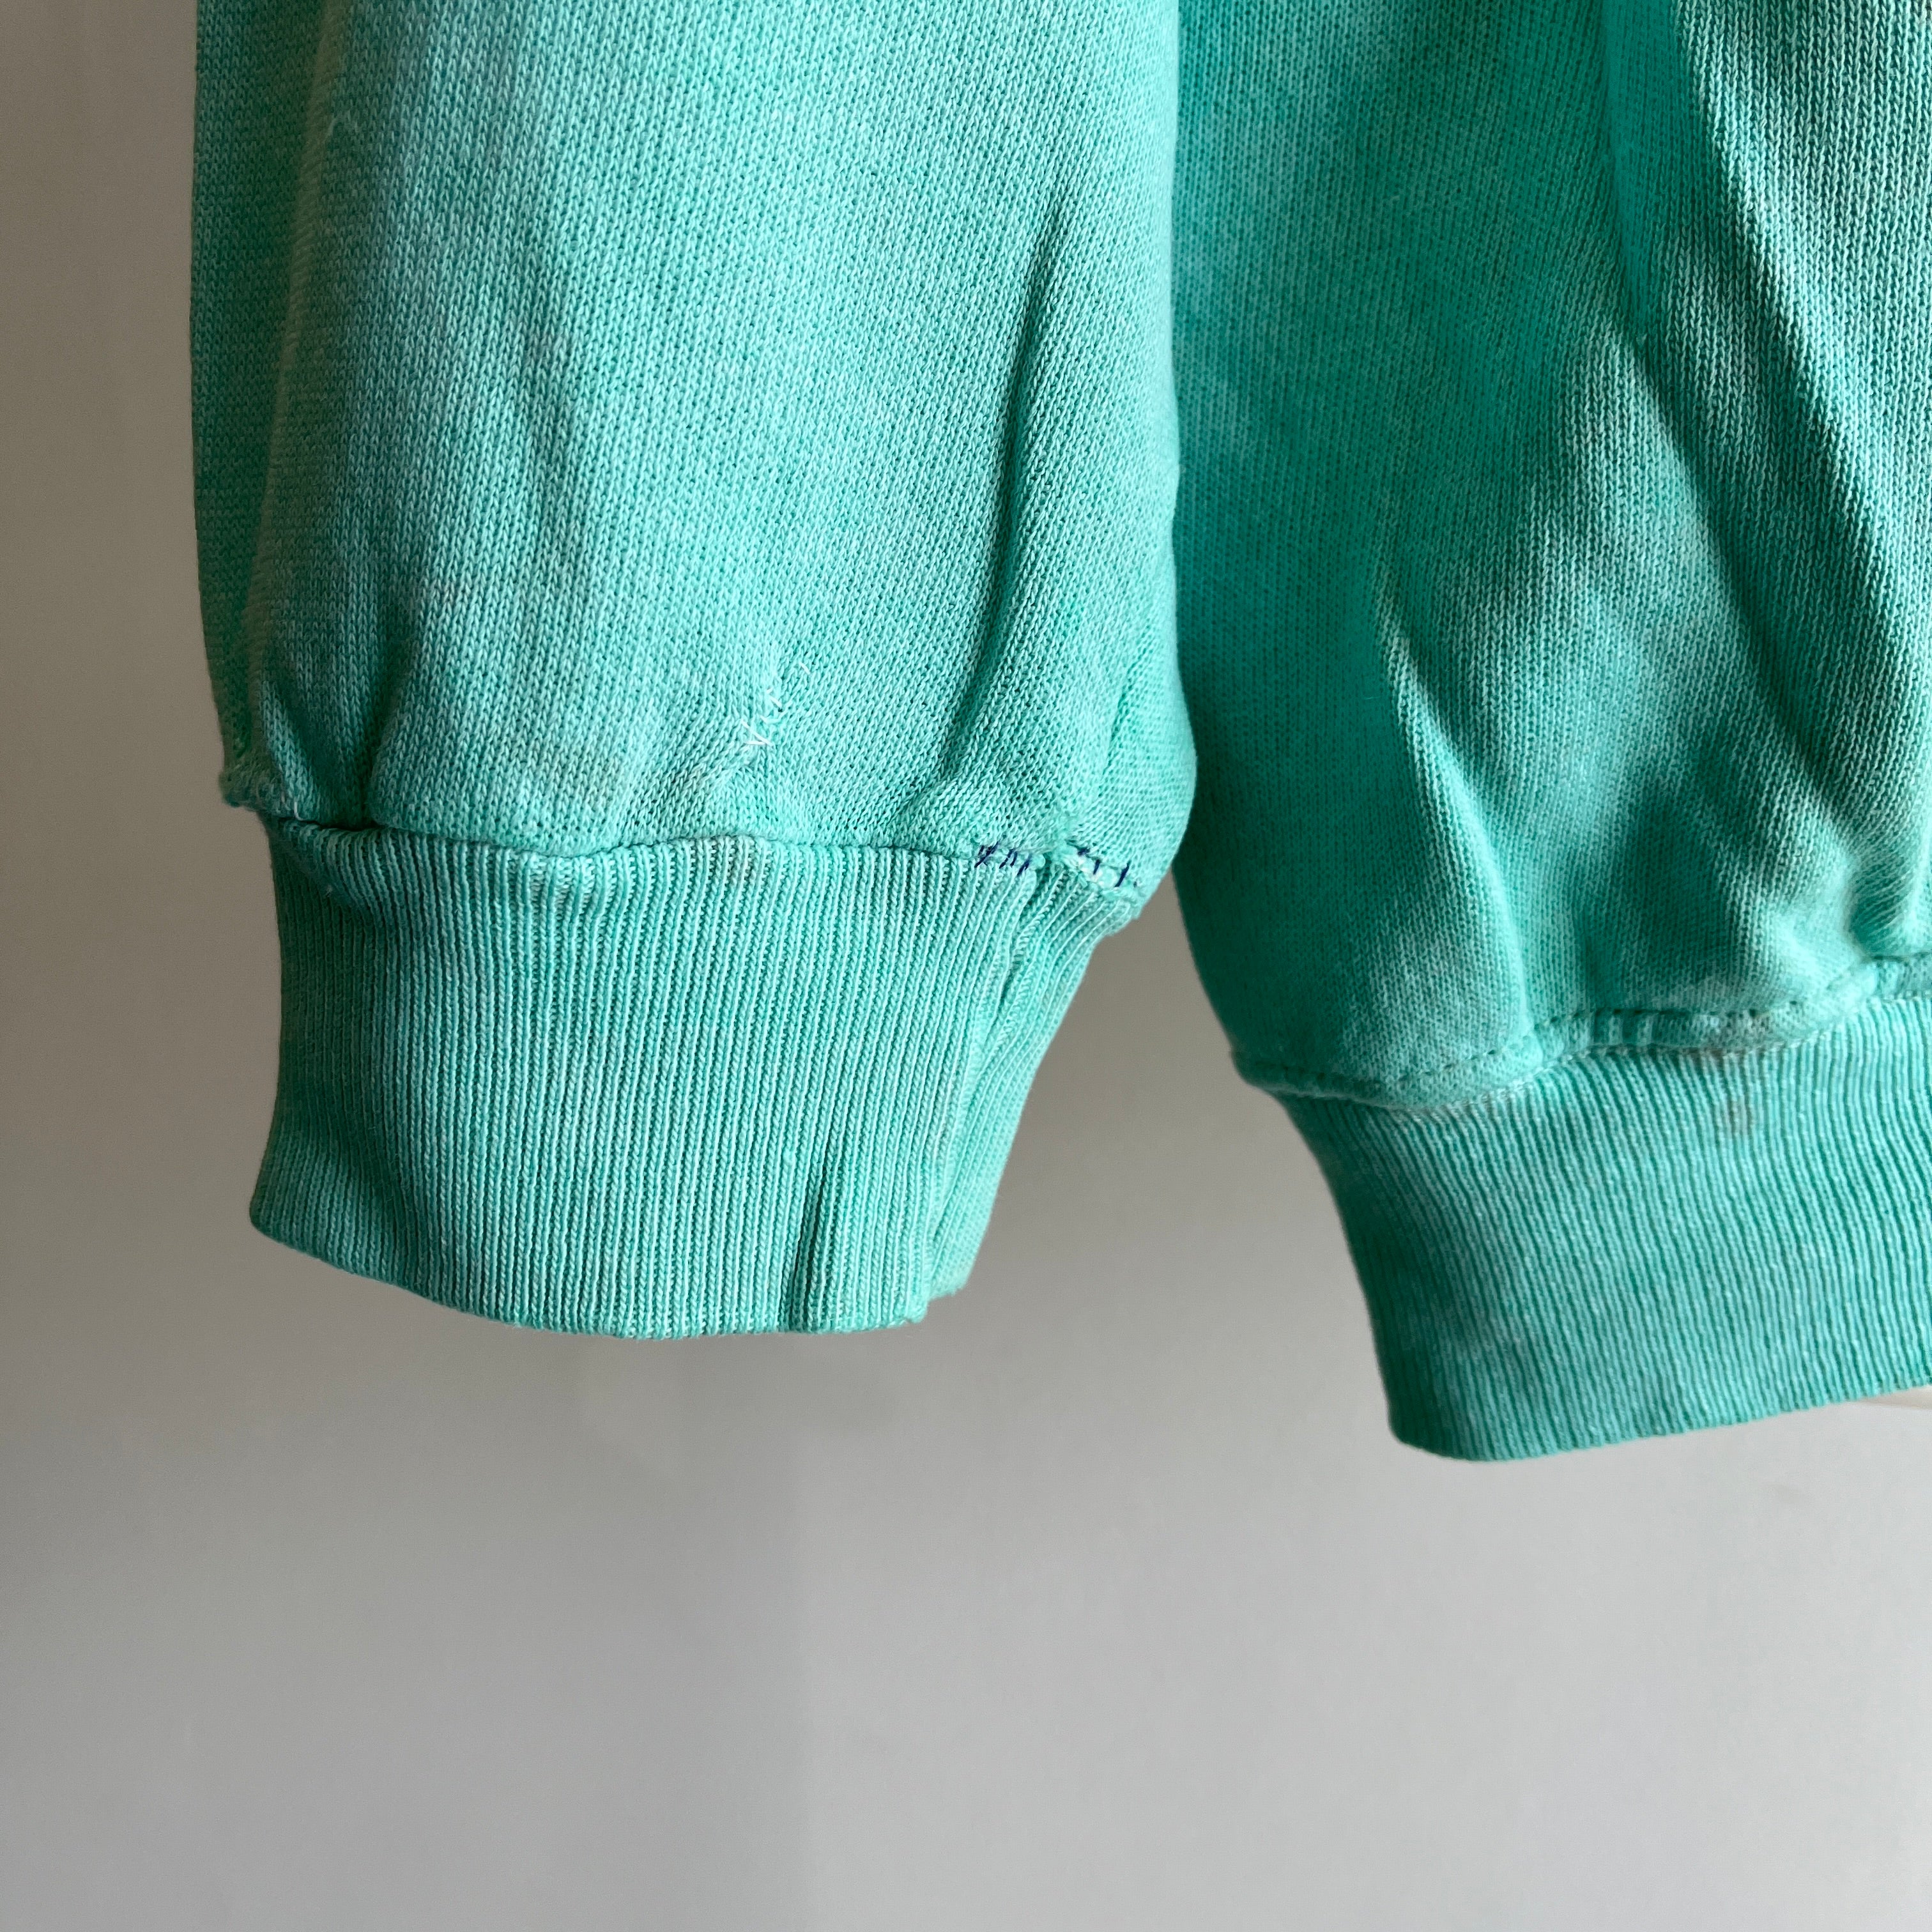 1980s ULTRA CLASSIC Maui + Sons Thin Stained Mended Sweatshirt - Collection personnelle